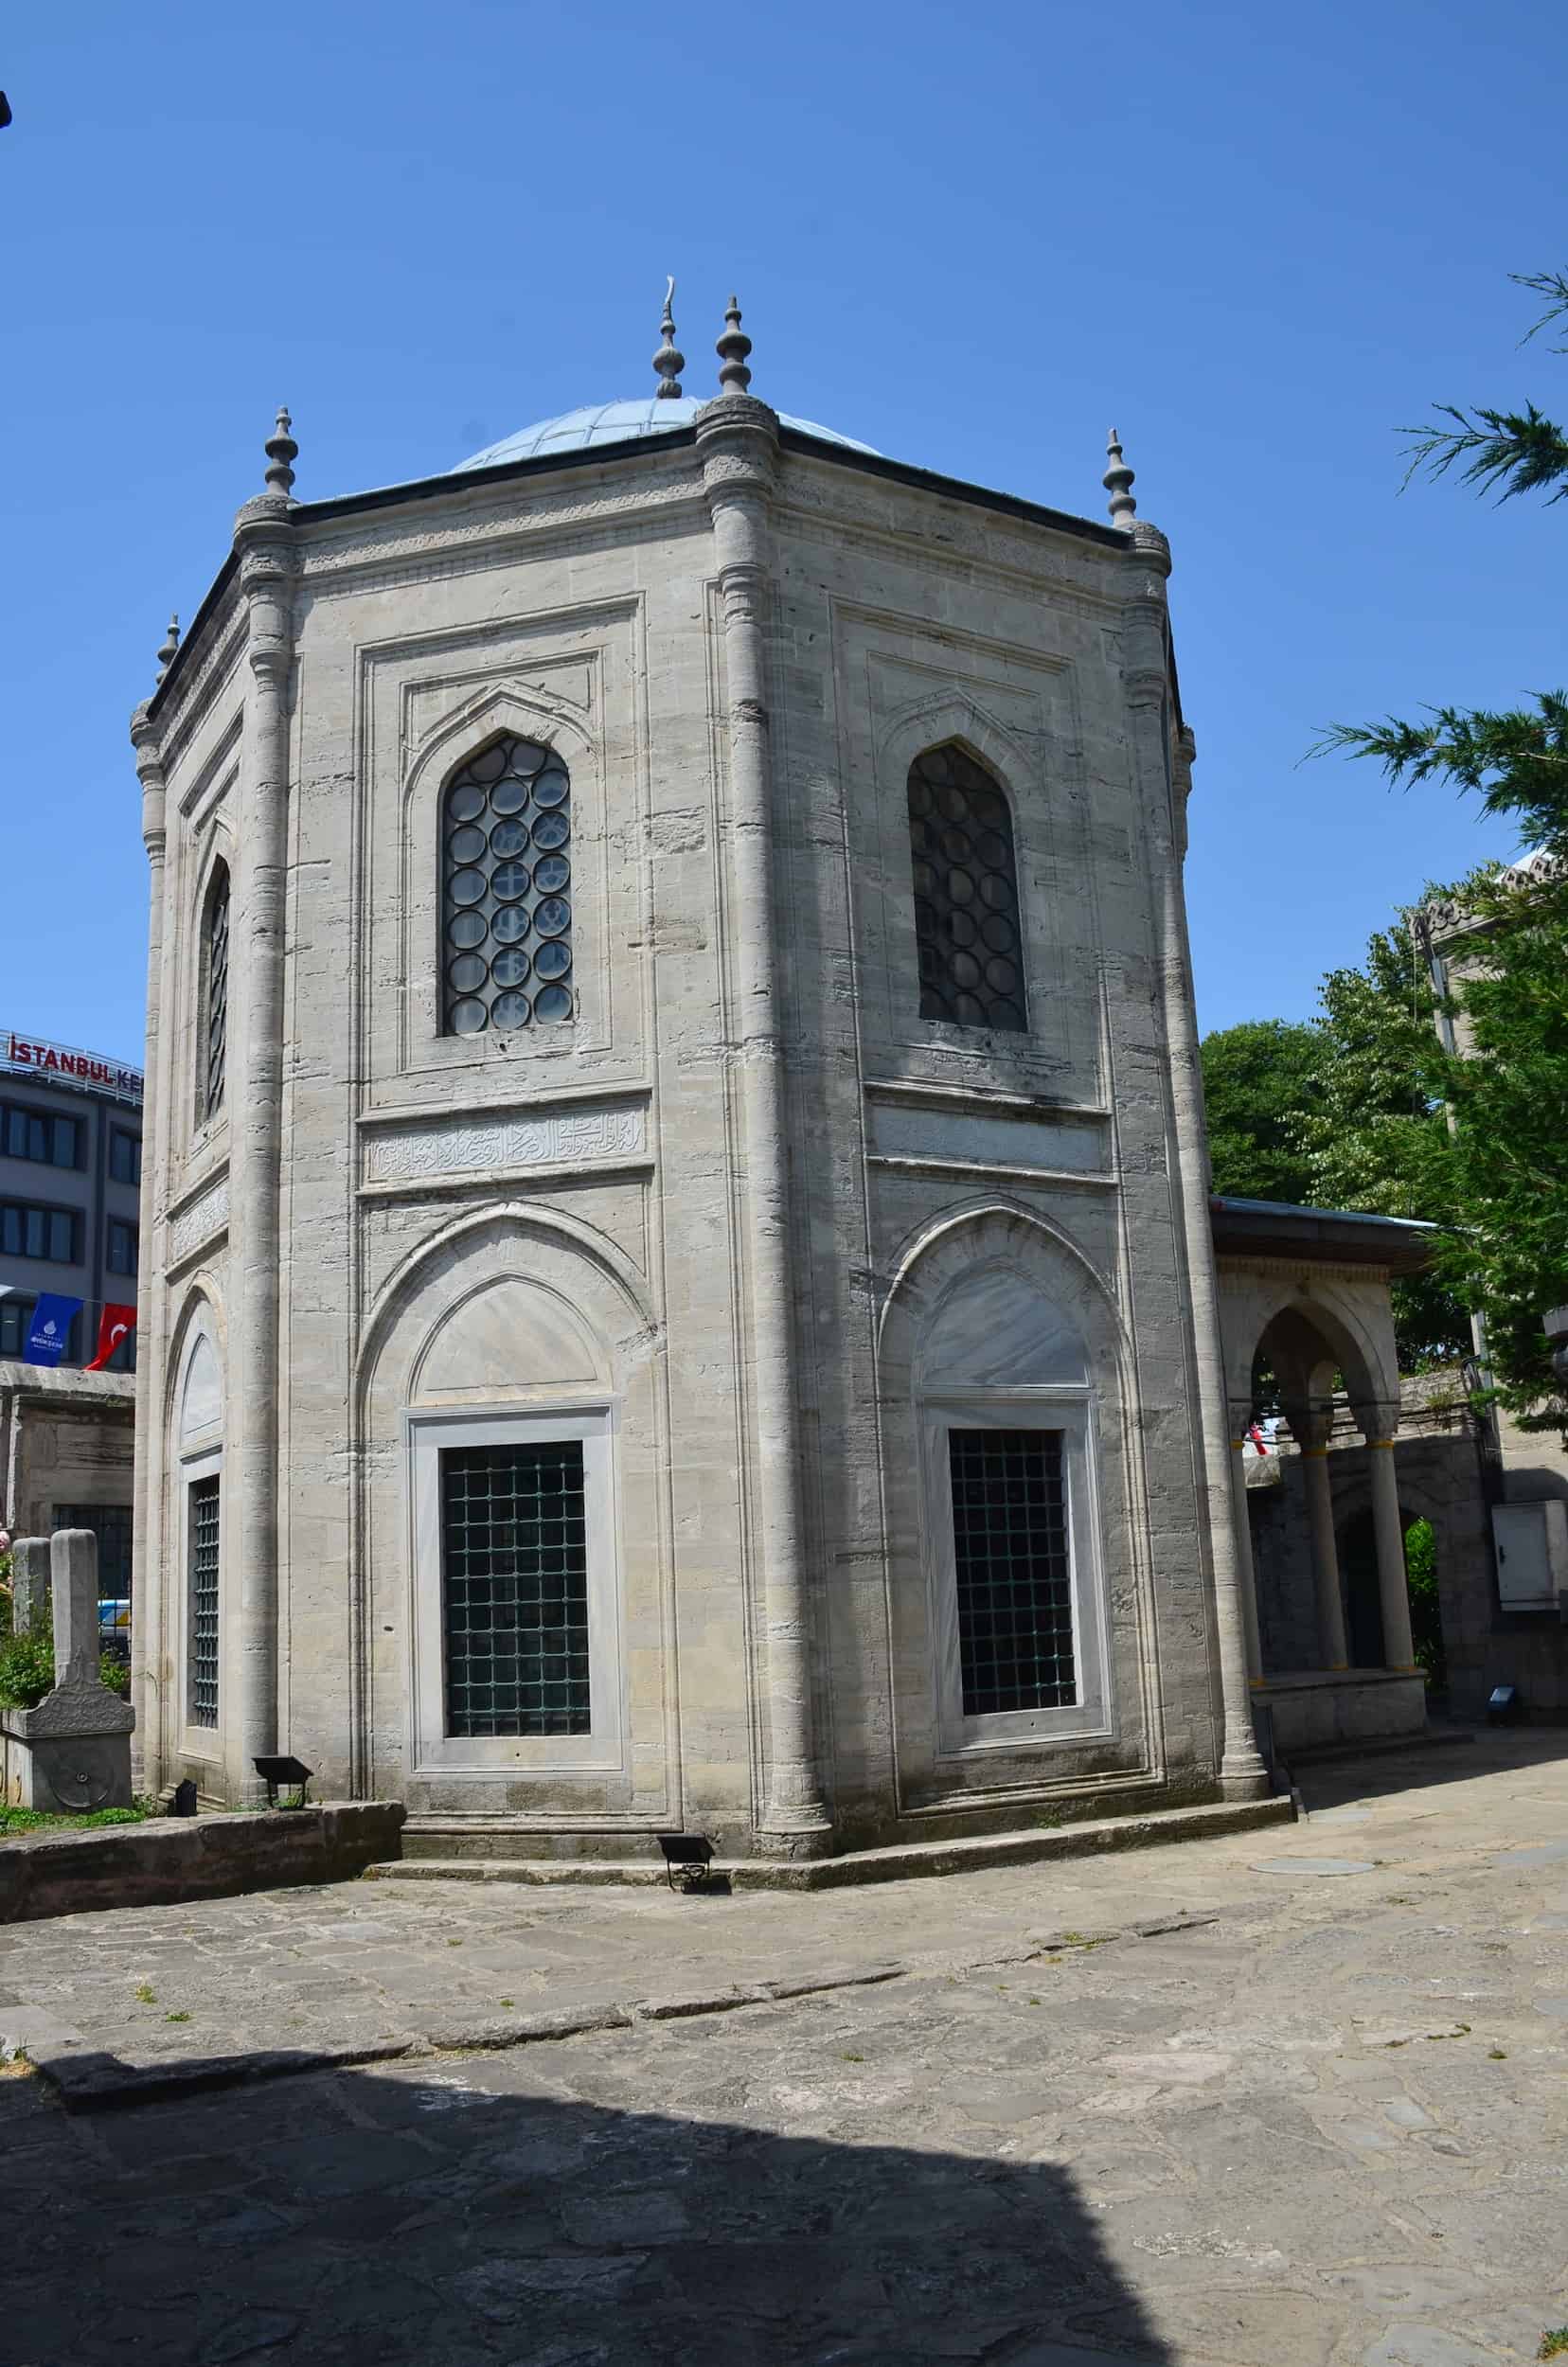 Tomb of Damat Ibrahim Pasha at the Şehzade Mosque Complex in Istanbul, Turkey